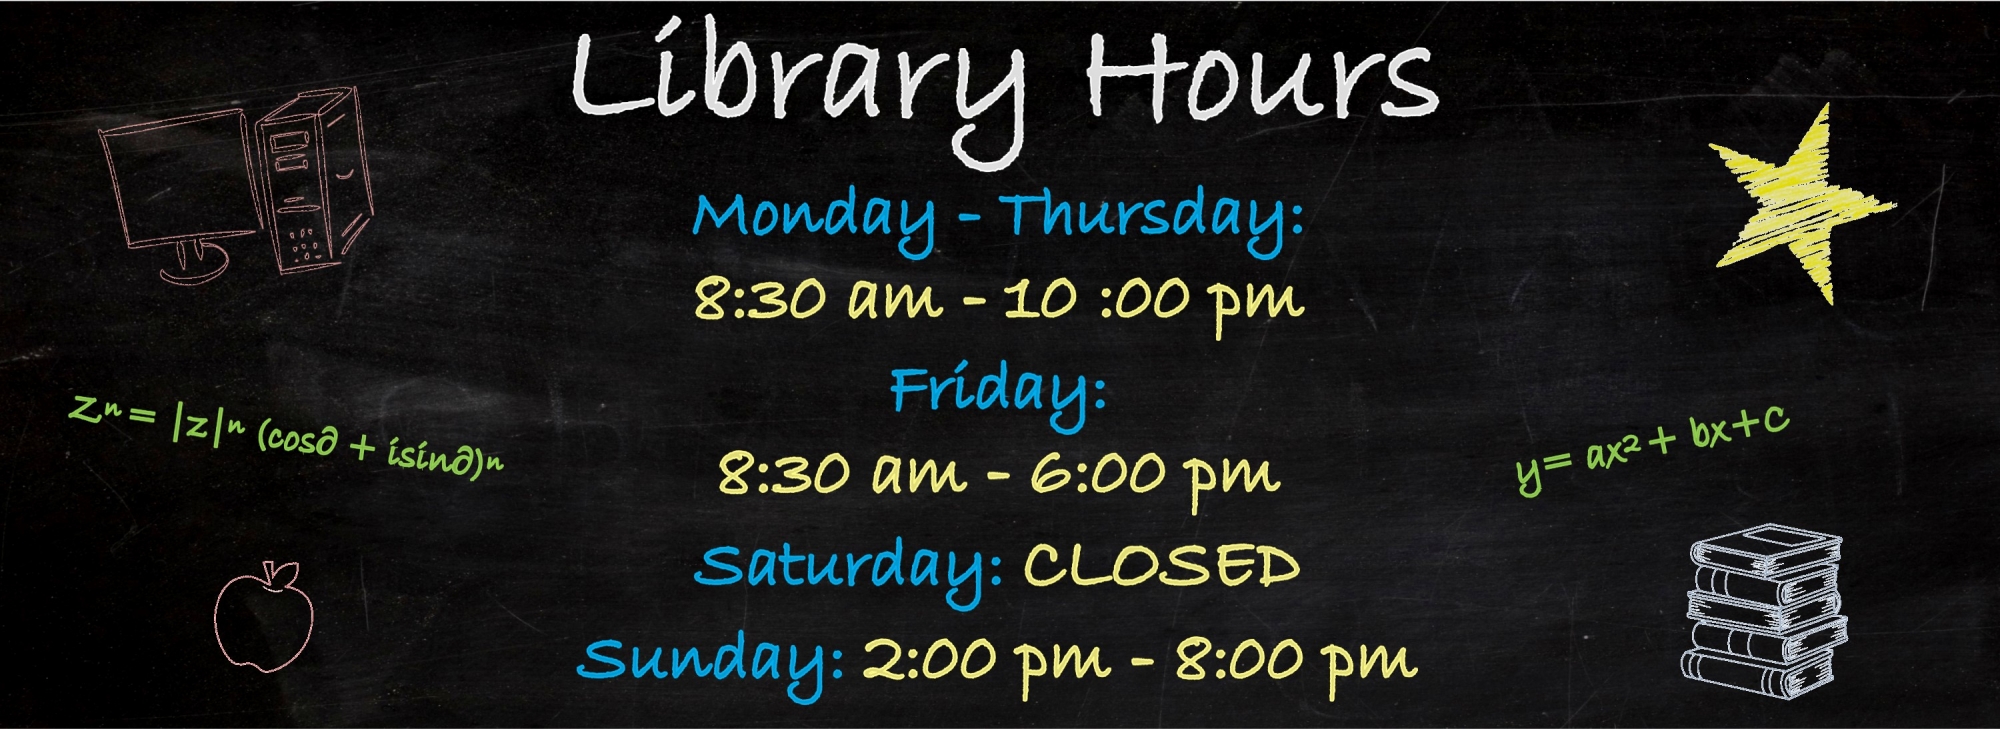 20190503 Library Hours